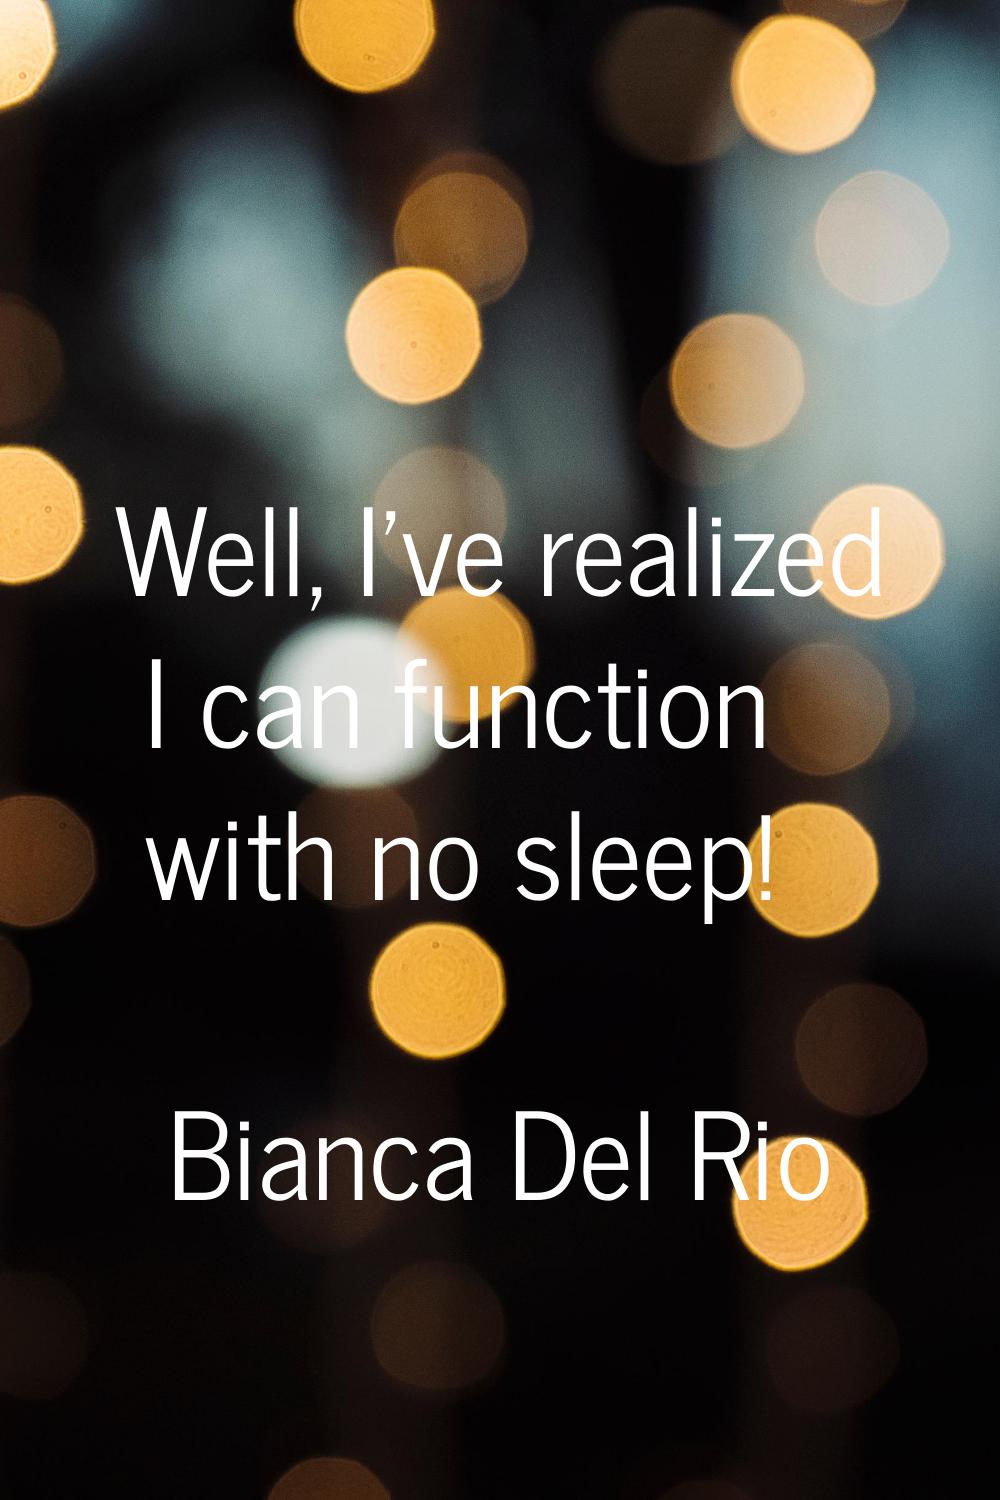 Well, I've realized I can function with no sleep!